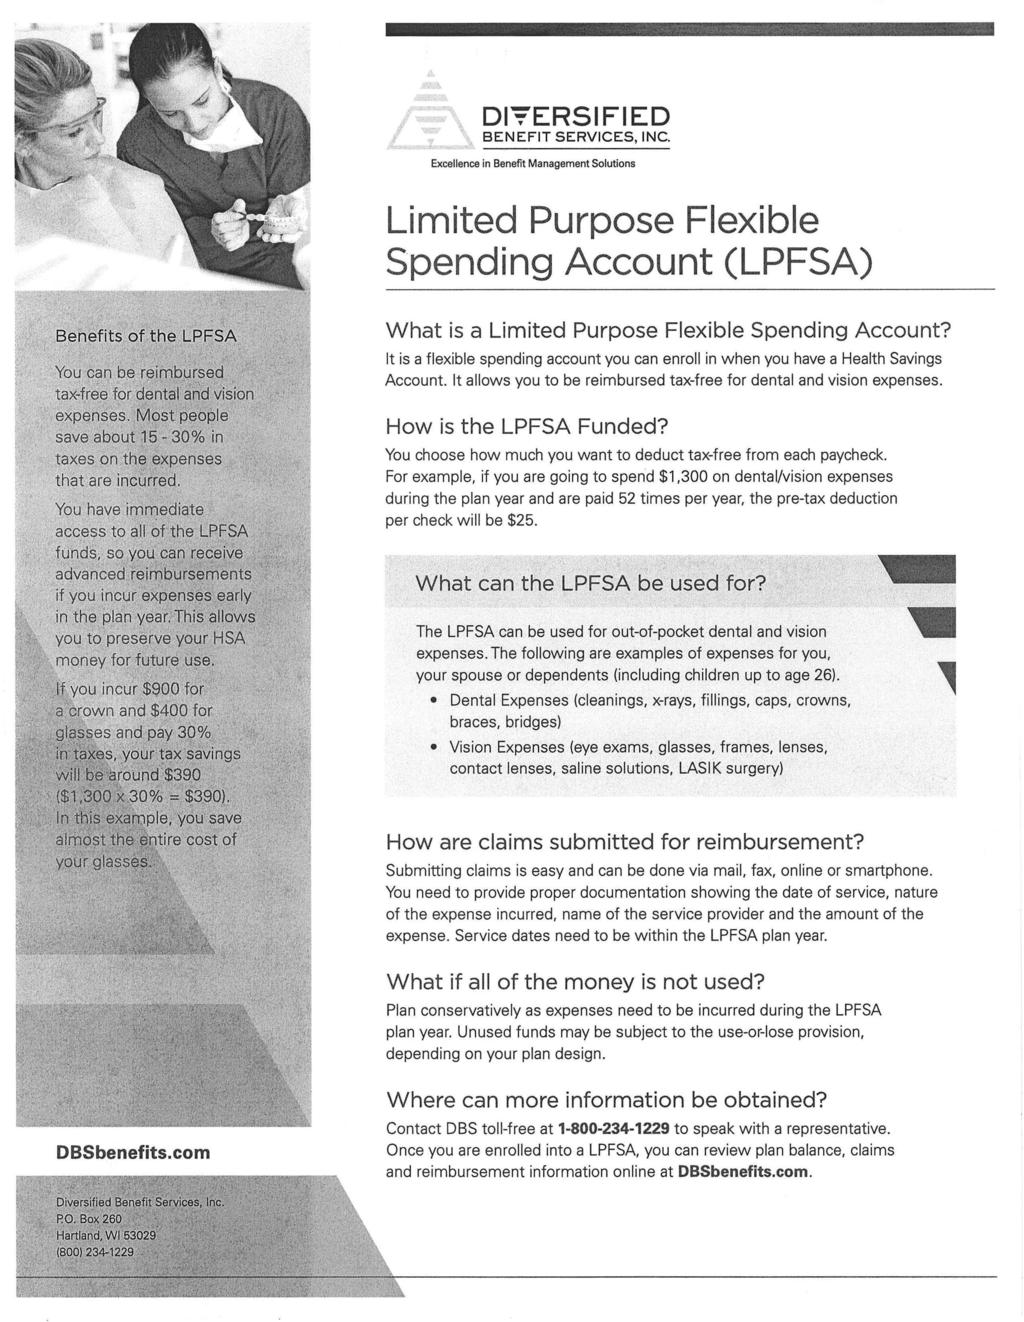 D1'9'ERSIFIED Limited Purpose Flexible Spending Account (LPFSA) What is a Limited Purpose Flexible Spending Account?